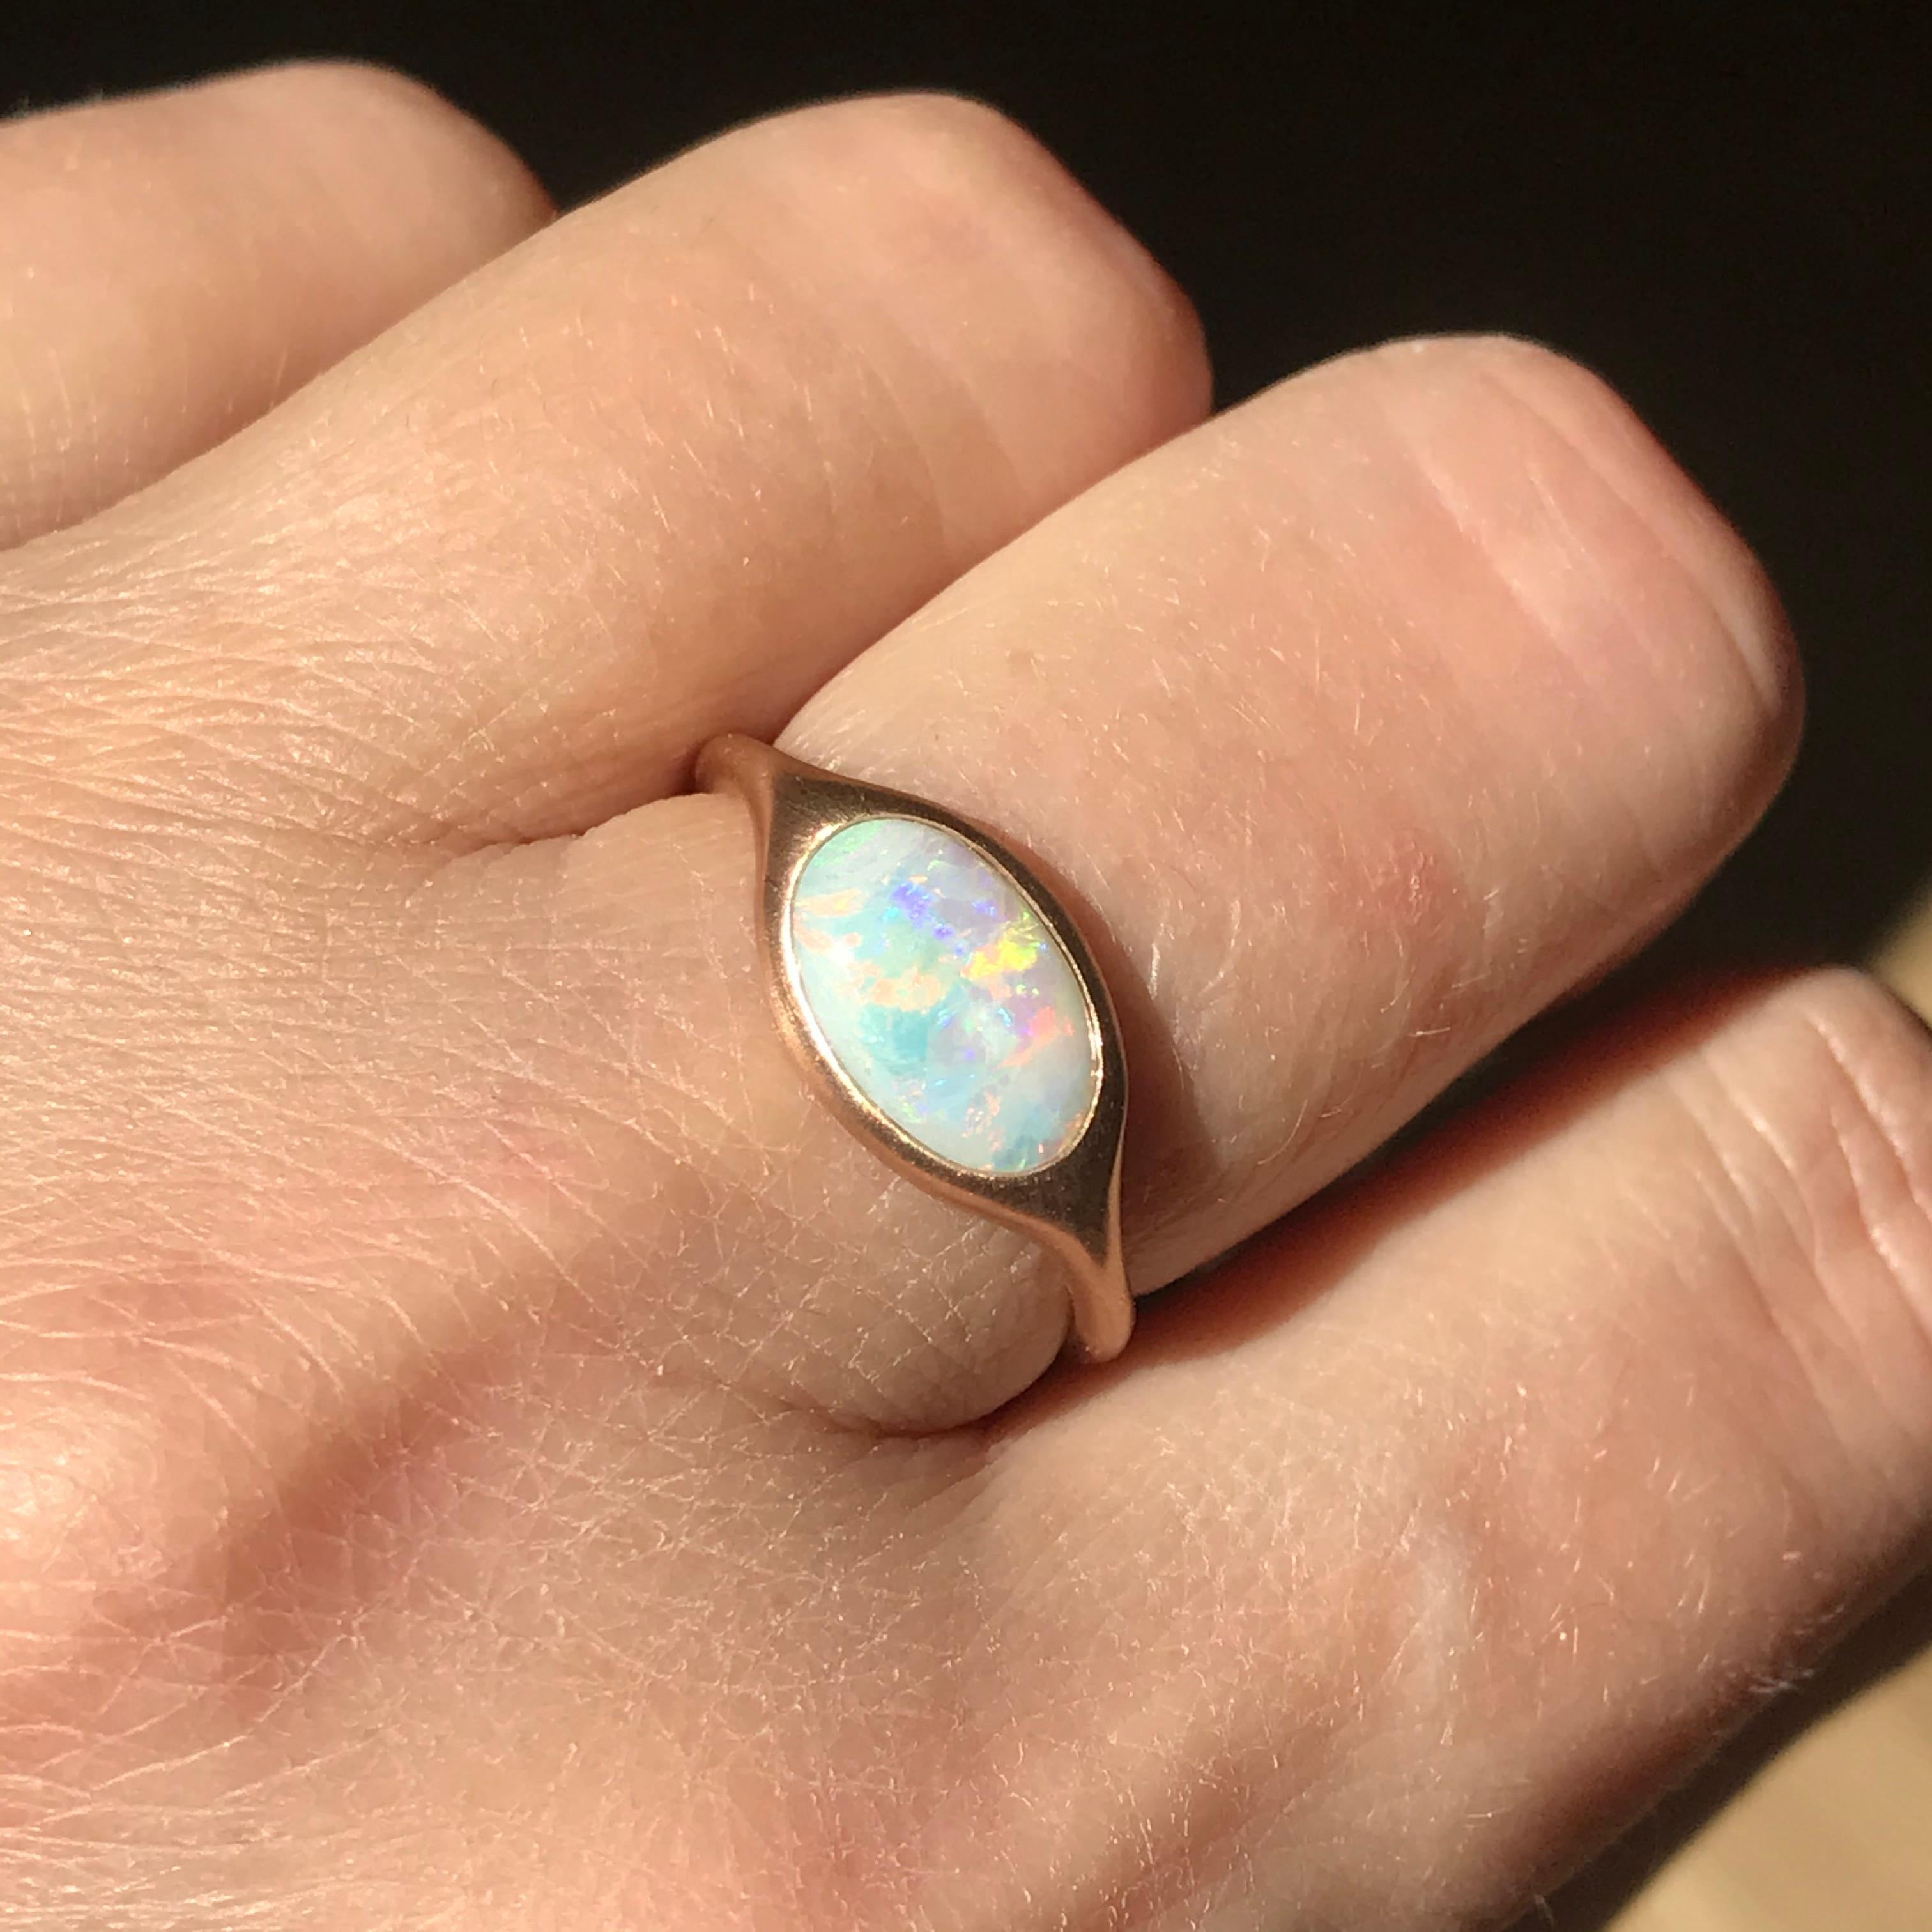 Dalben design 18k rose gold satin finishing ring with a 0,9 carat bezel-set oval shape Australian crystal opal . 
Ring size US 7 - EU 54 re-sizable to most finger sizes. 
Bezel setting dimension: 
width 12,3 mm, 
height 8,1 mm. 
The ring has been